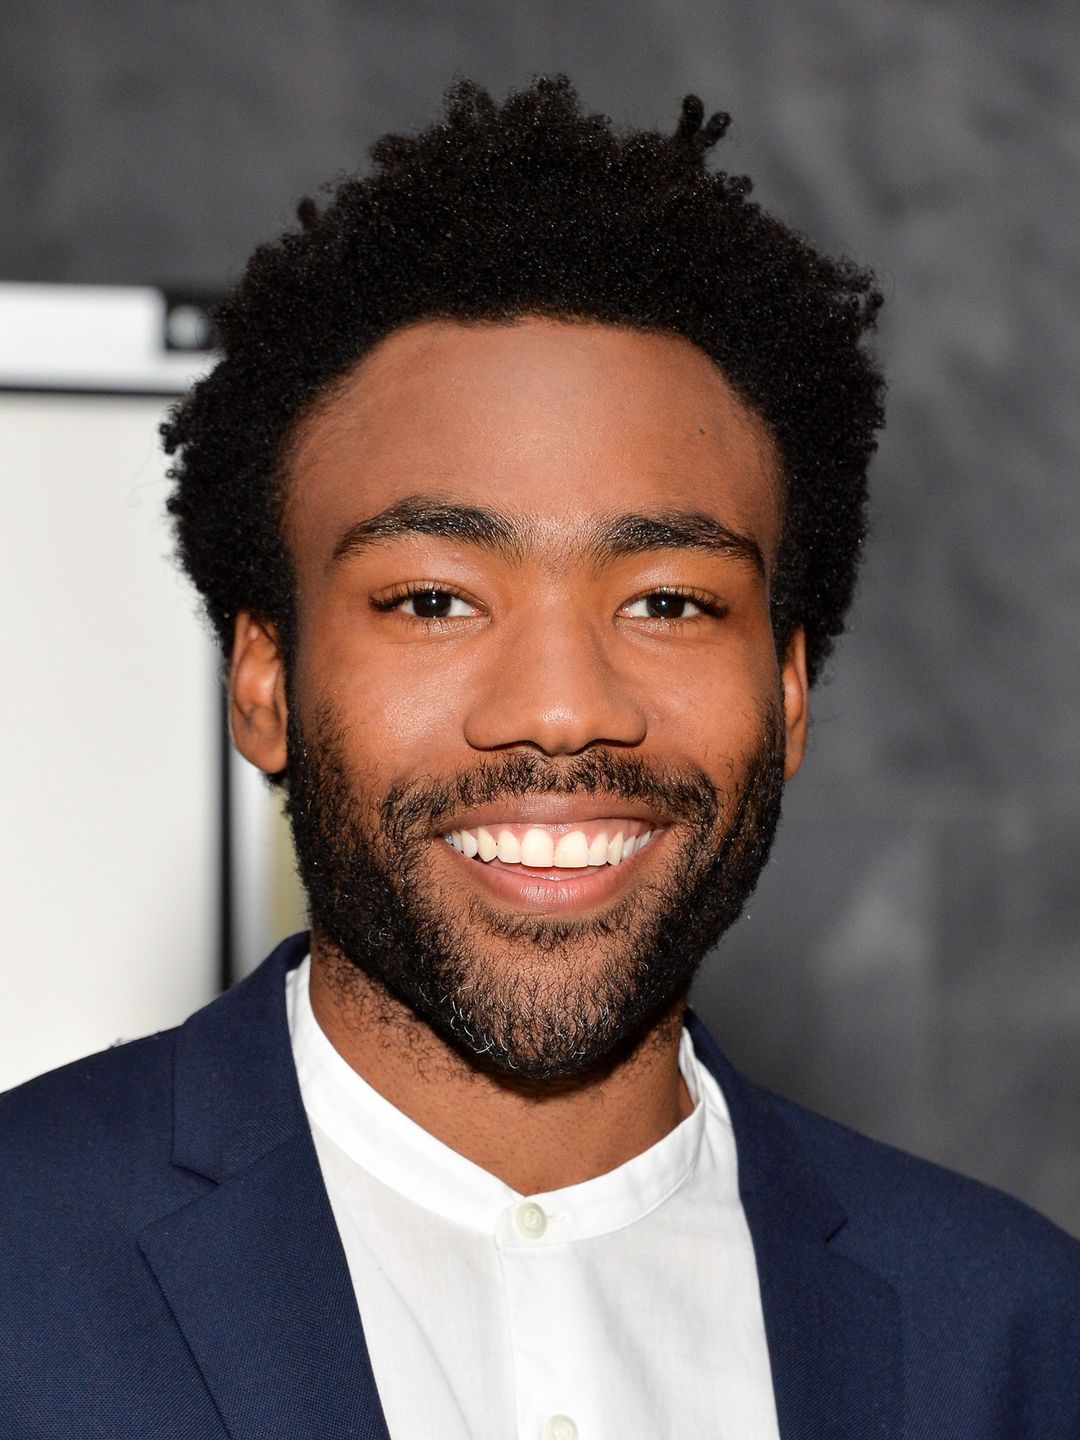 Donald Glover life story